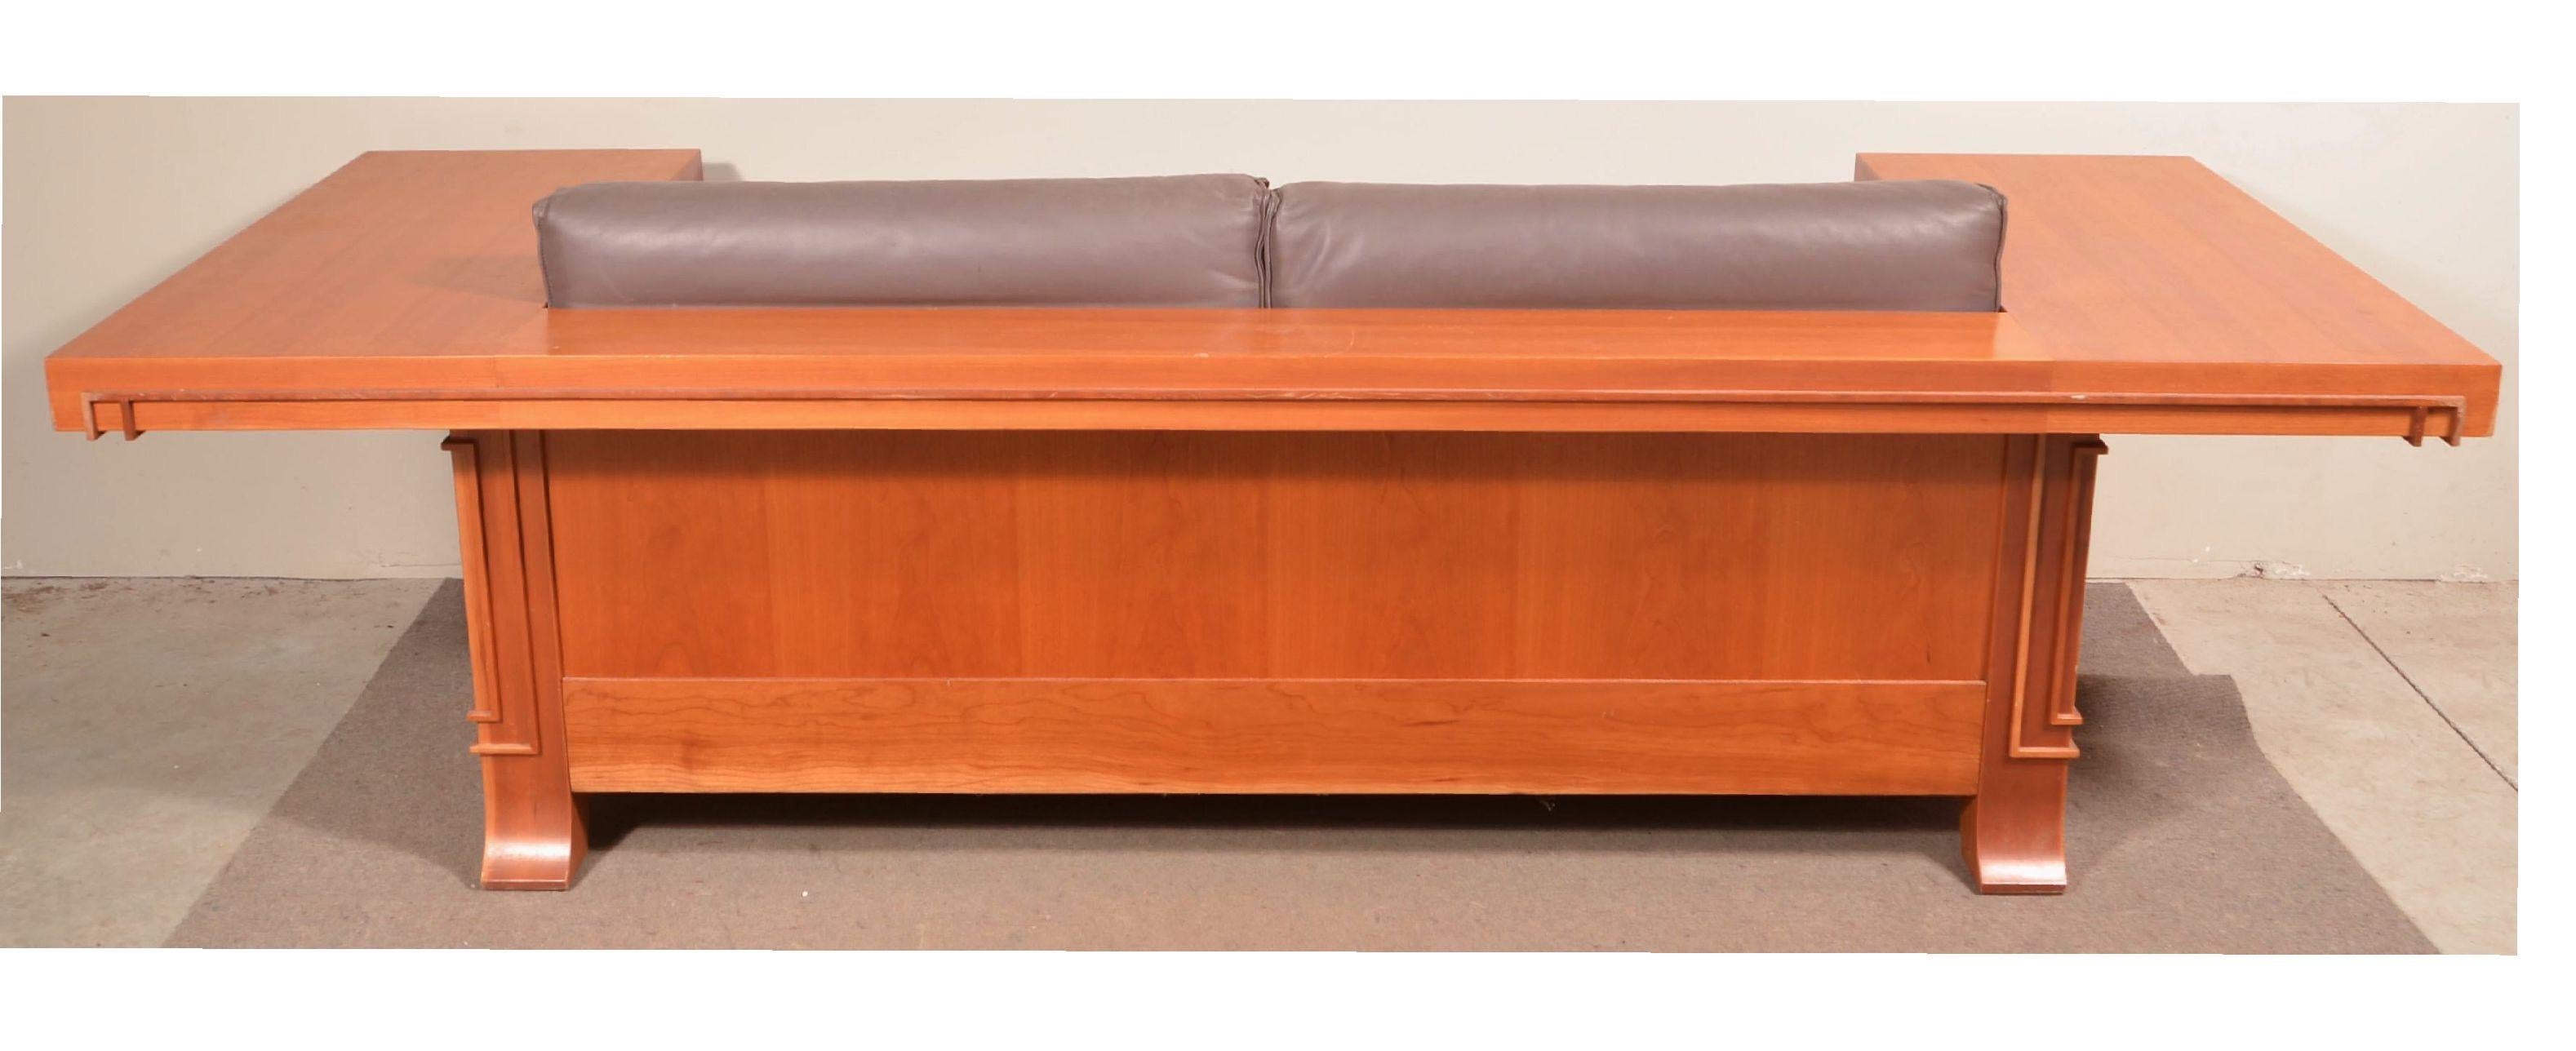 Frank Lloyd Wright for Cassina Robie 3-leather two-seat sofa, cherrywood, signed.

Exceedingly rare piece Frank Lloyd Wright design, produced in a limited edition by Cassina. Signed, Numbered. FLW designed this piece in 1908 for his Robie House.